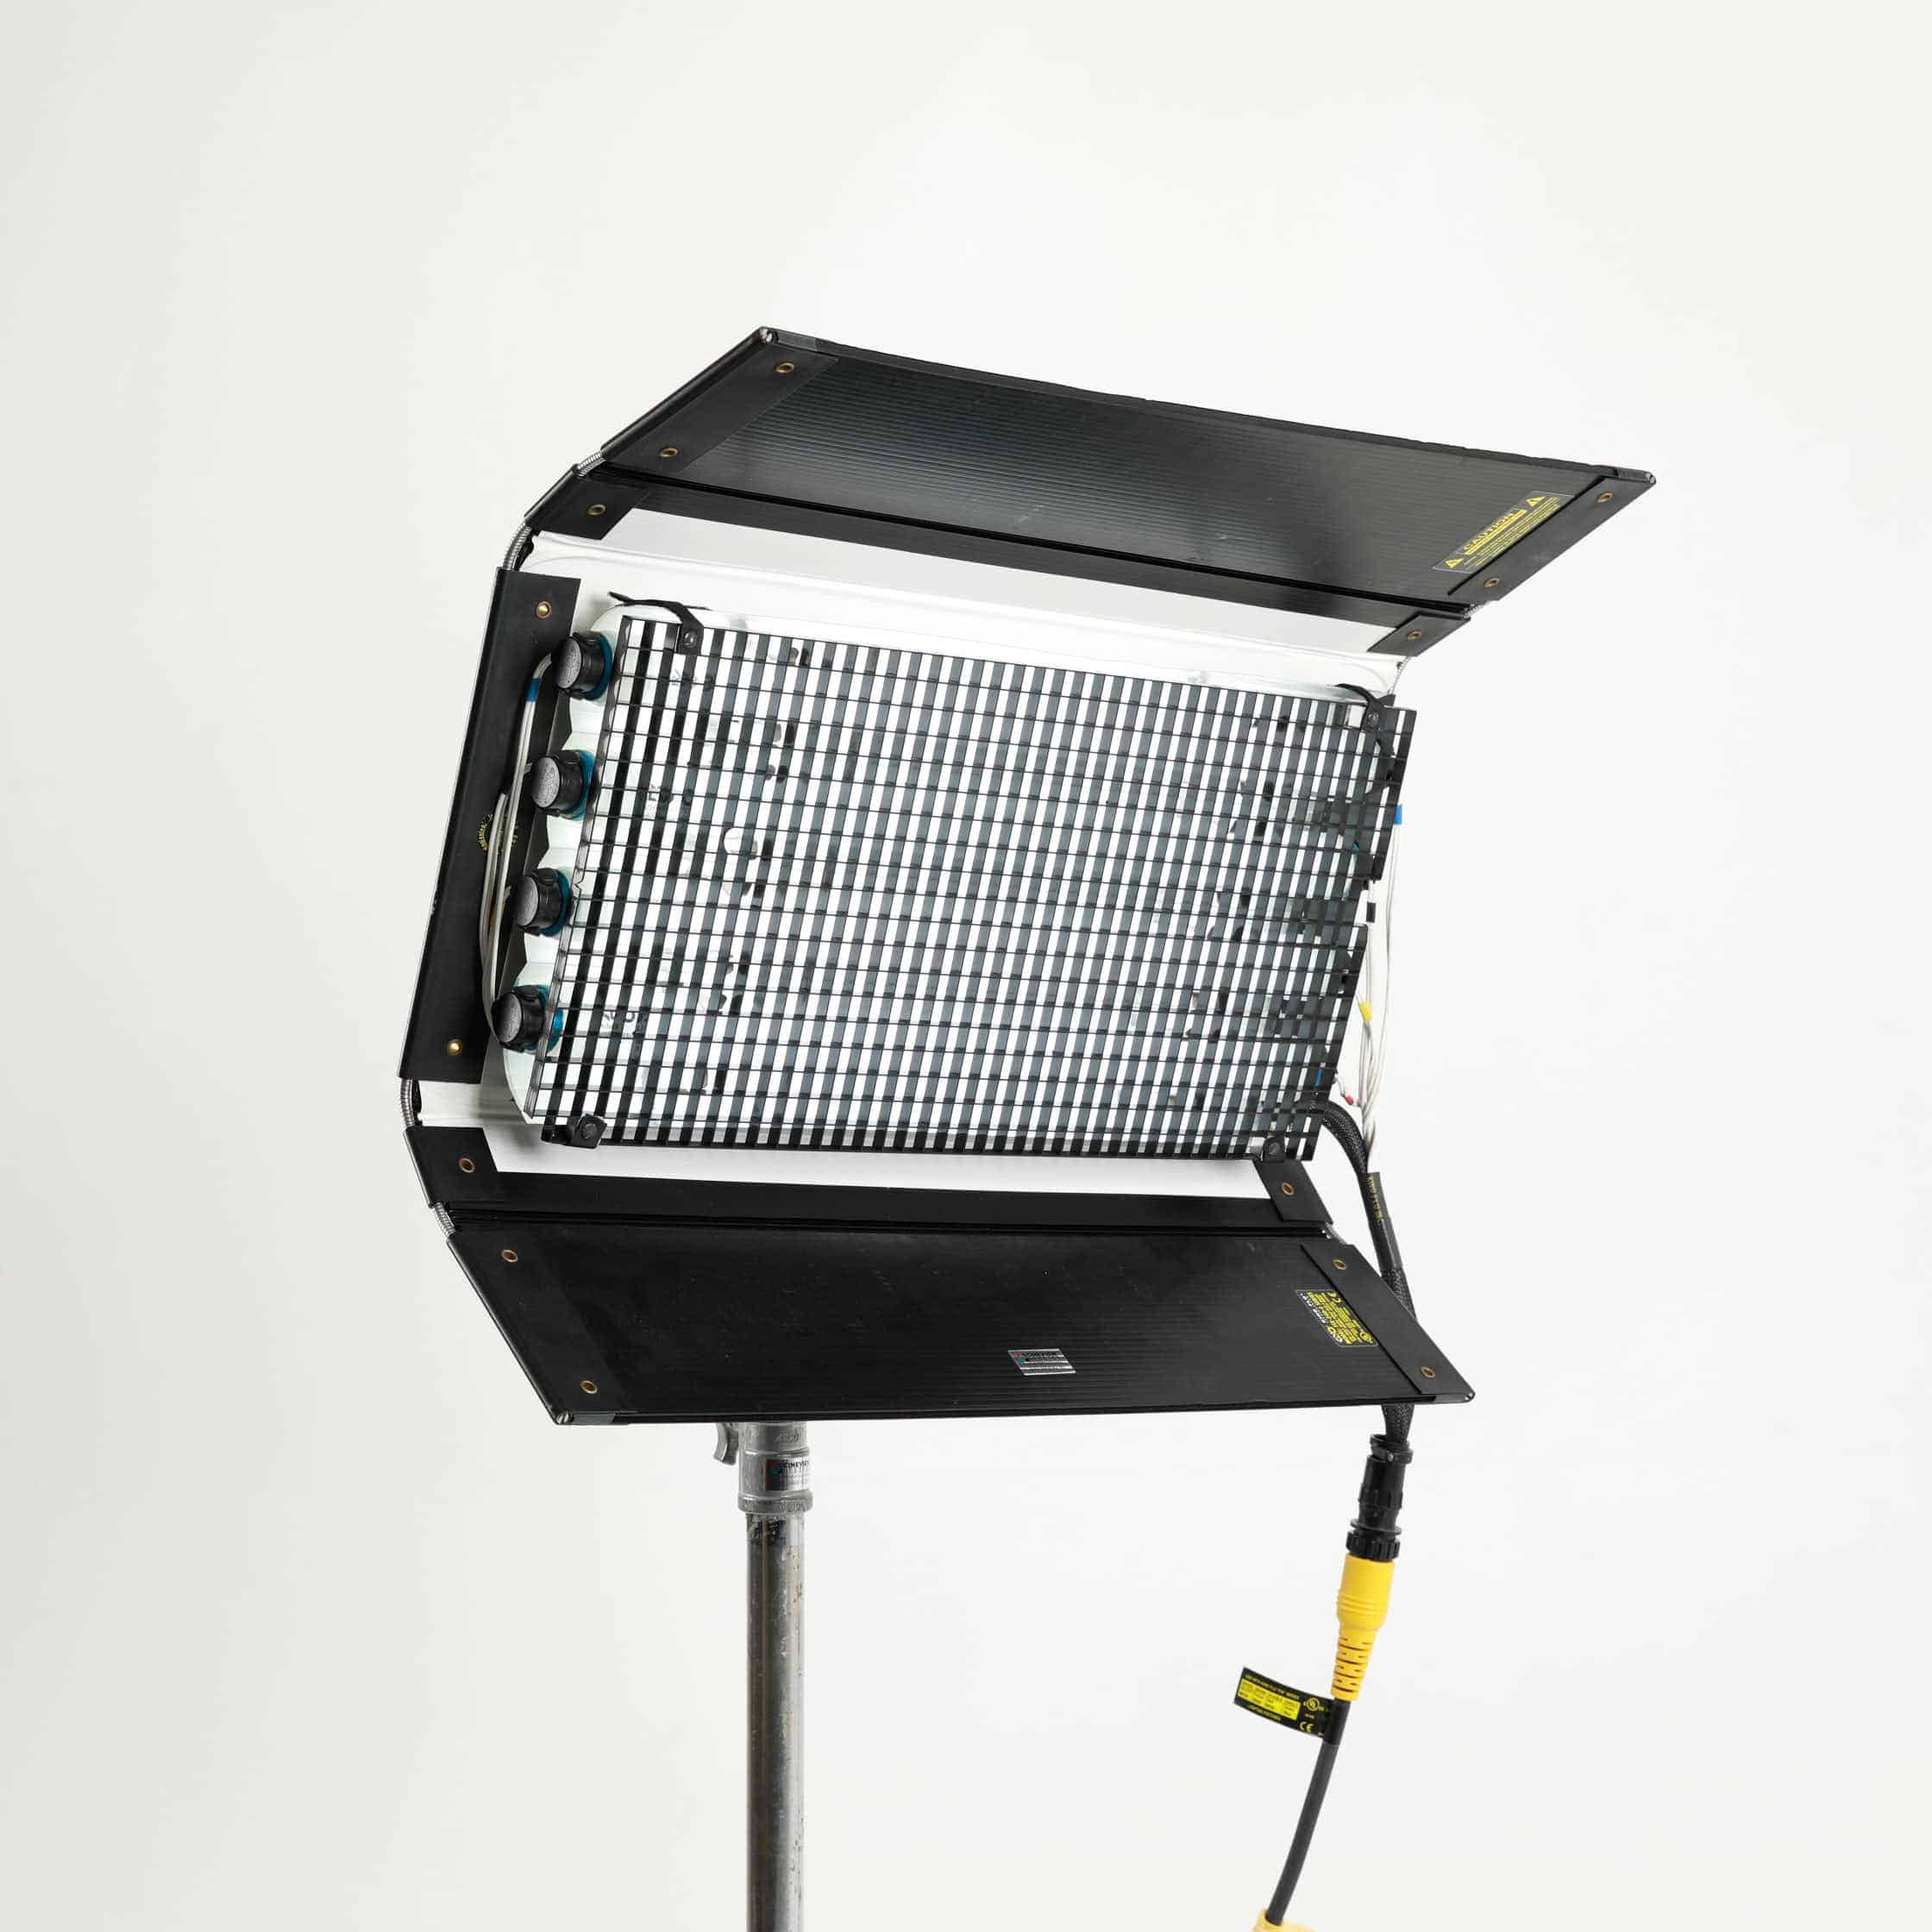 Kino Flo 4 Bank 2ft Continuous Lights – Cineview Studios